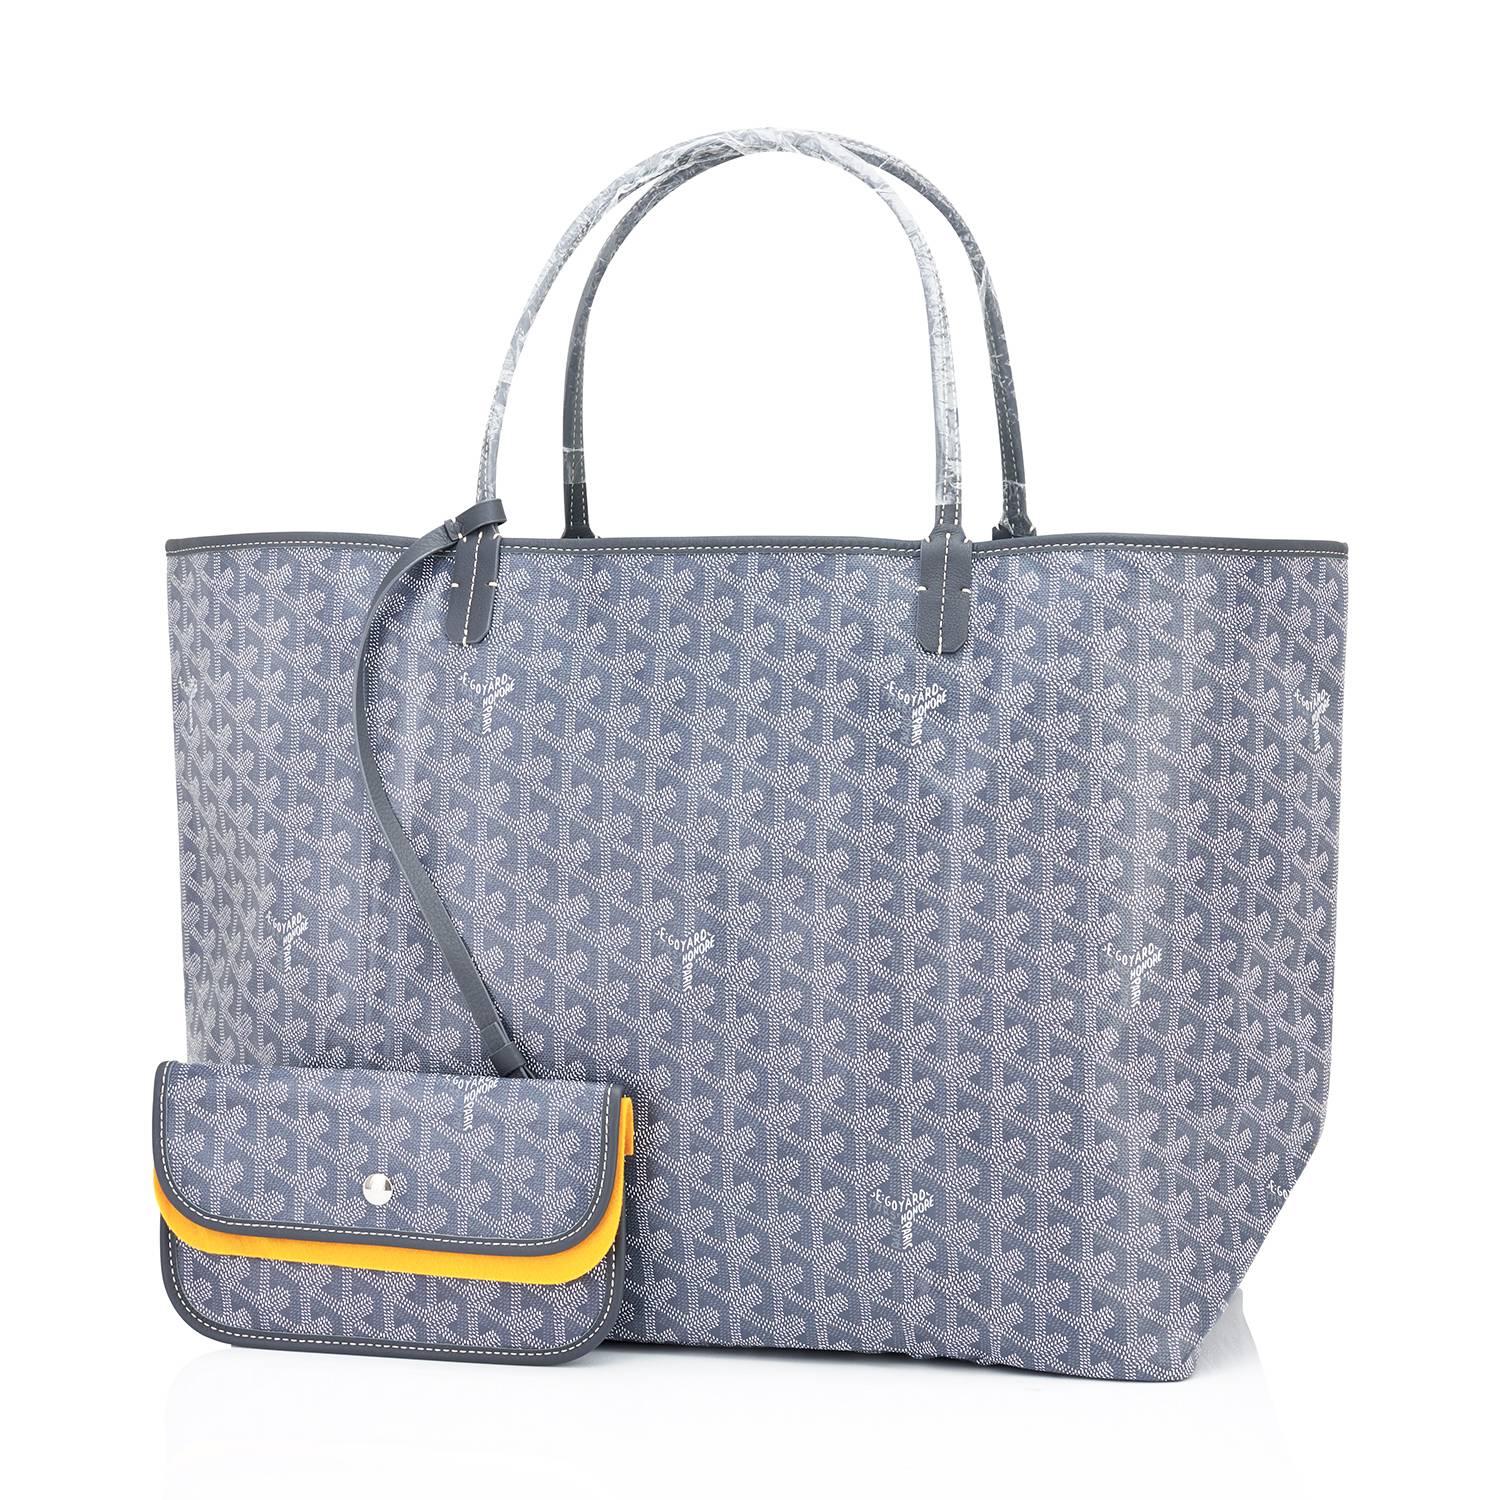 Goyard Grey St Louis GM Chevron Tote Bag NEW,
Brand New.  Store Fresh. Pristine Condition (with plastic on handles) 
Perfect gift! Comes with yellow Goyard sleeper and inner organizational pochette. 
This is the famous Goyard Chevron Tote in the